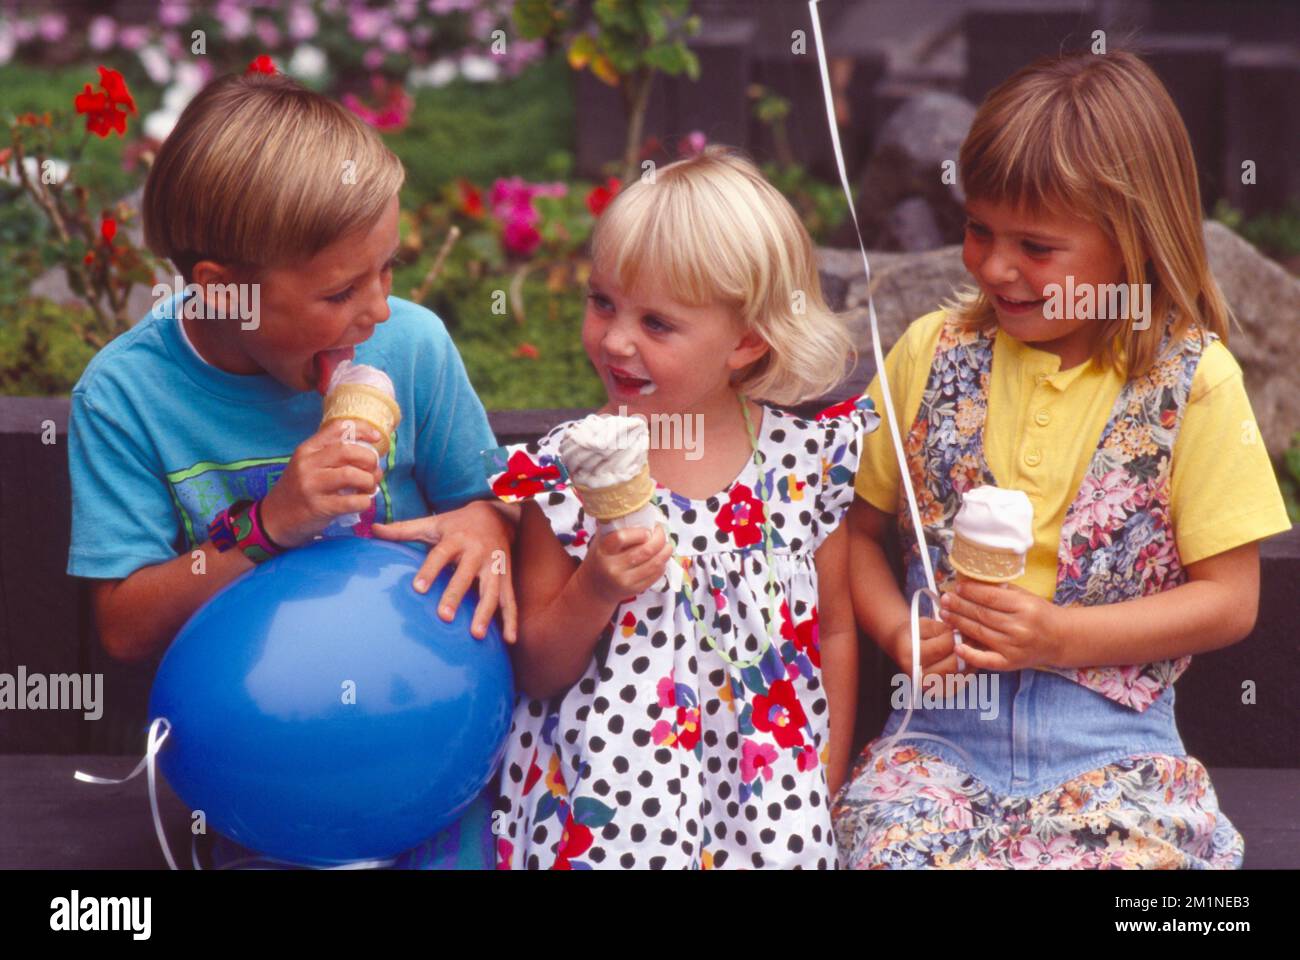 Boy and two girls sitting on a park bench eating ice cream Stock Photo